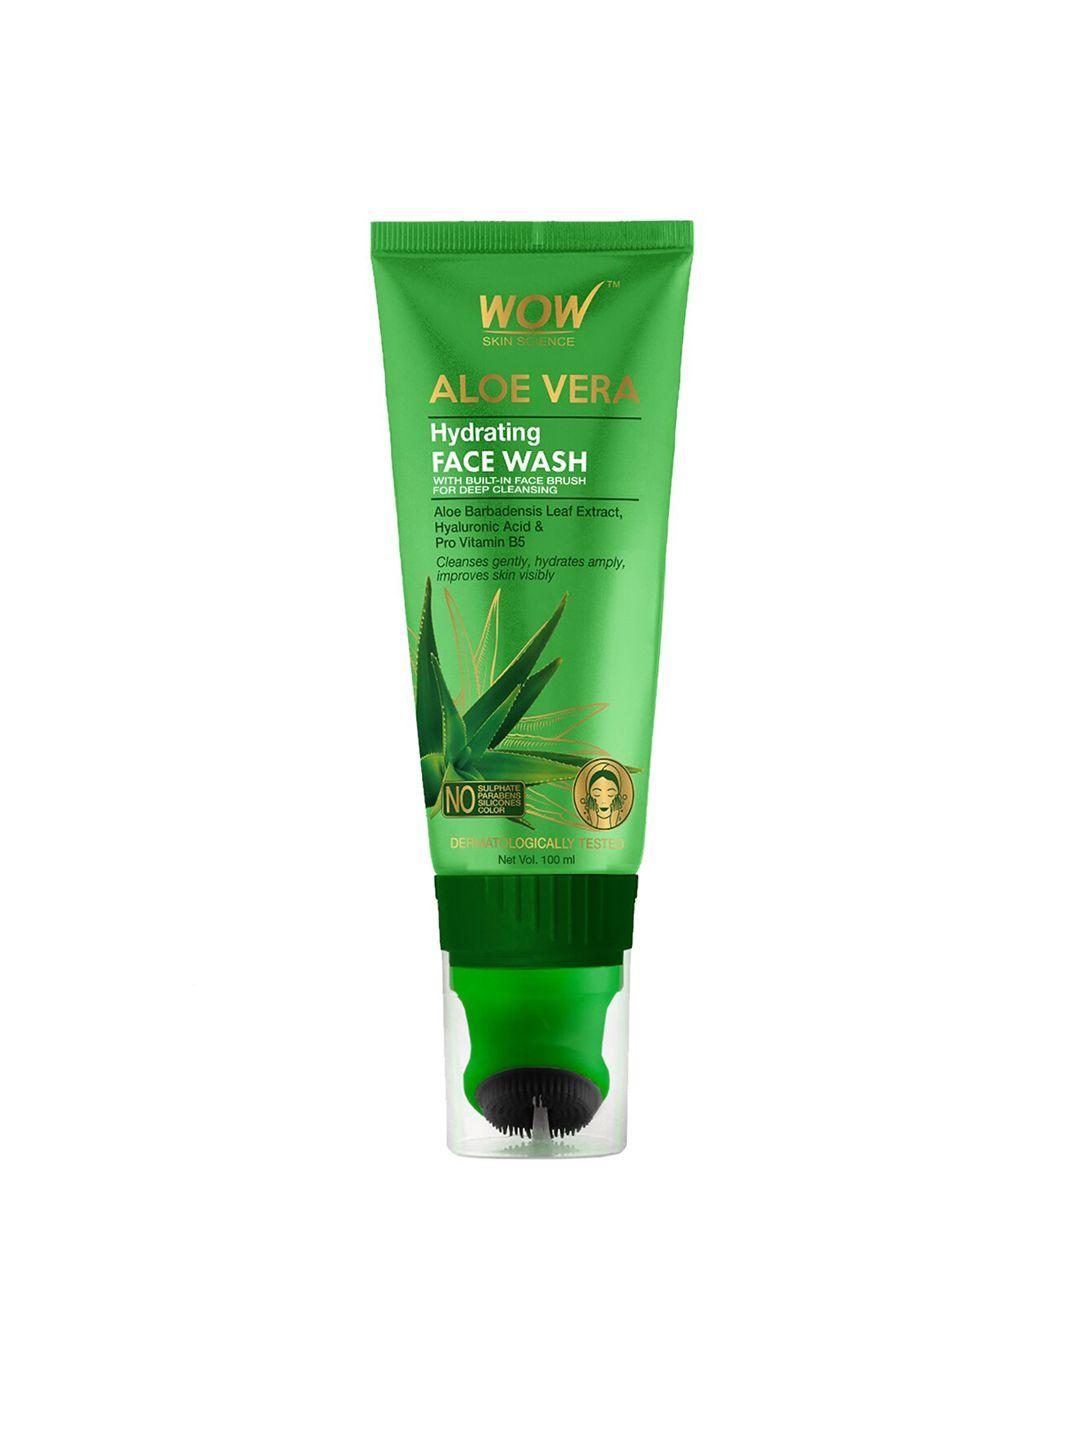 wow skin science aloe vera face wash gel with built-in face brush - 100 ml